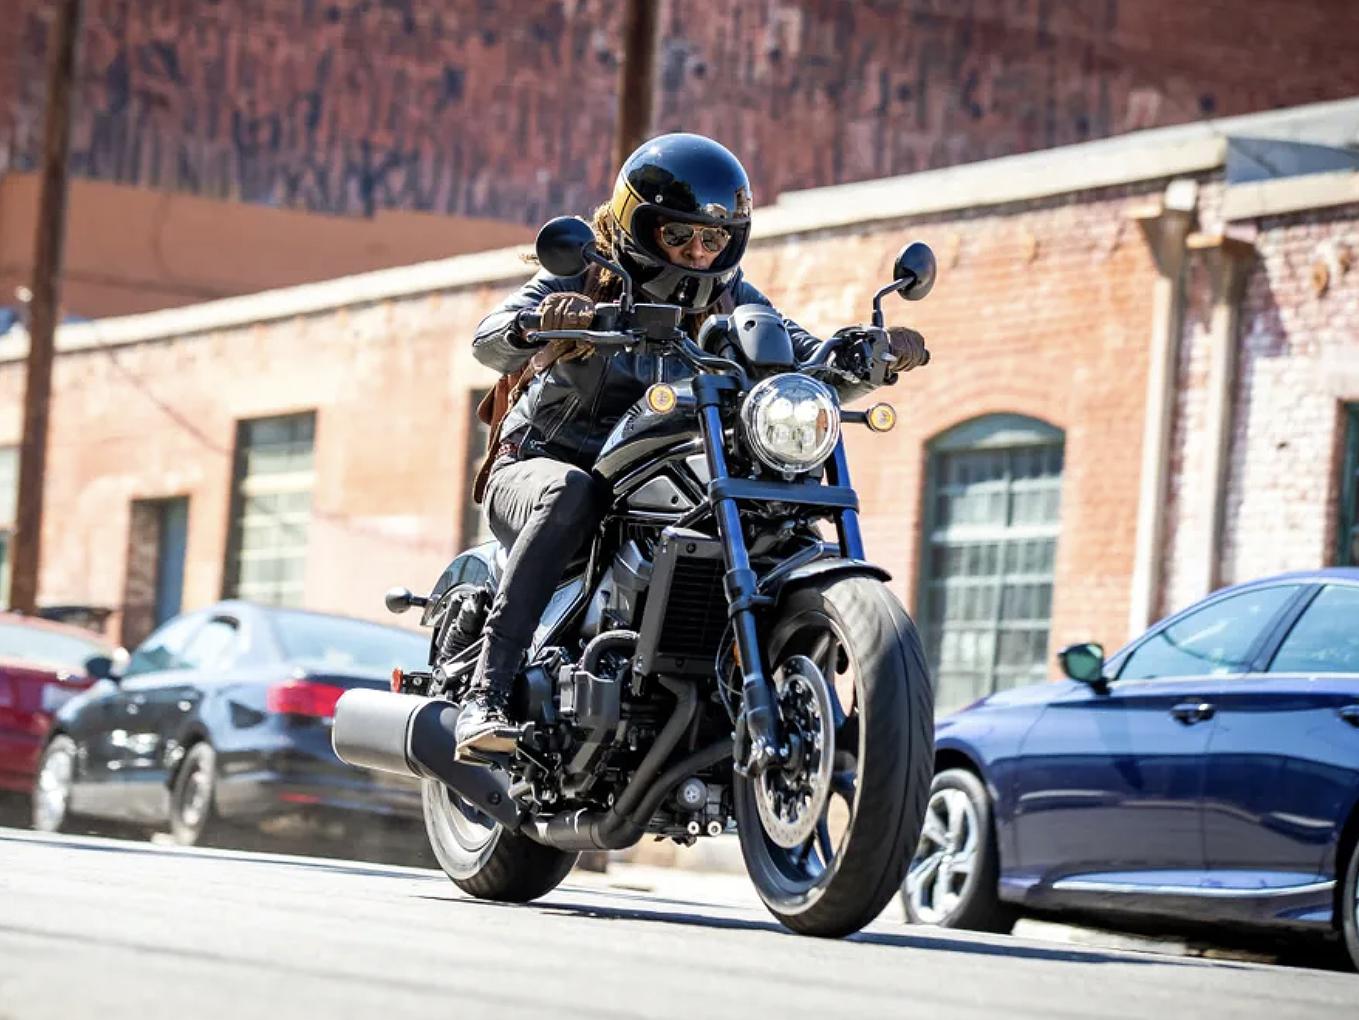 The 2021 Honda Rebel 1100 is a new addition to the Honda powersports lineup.